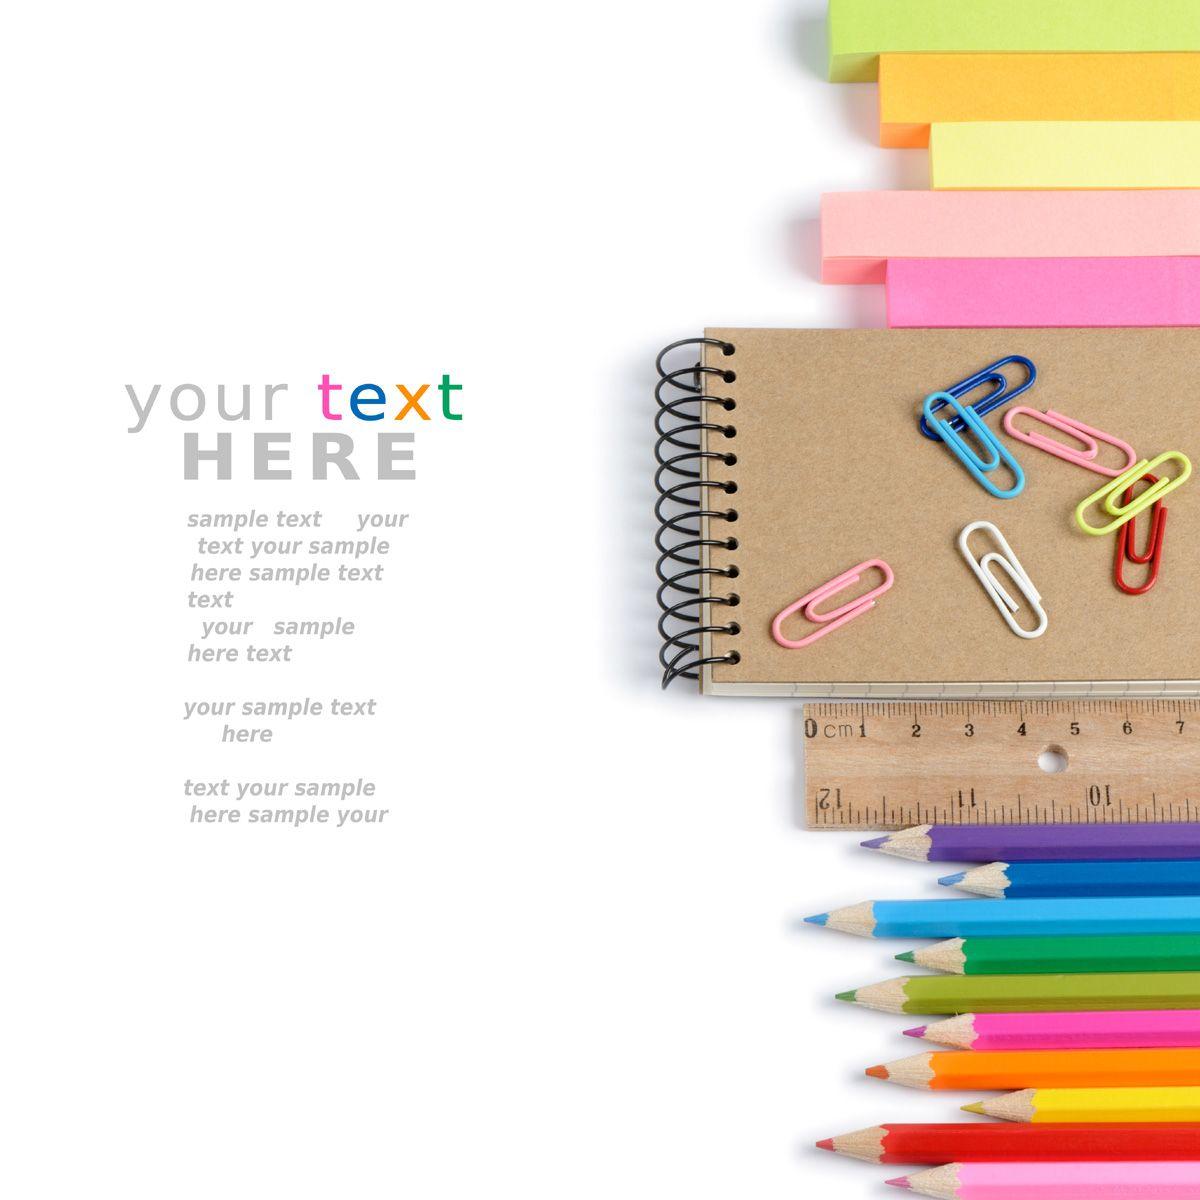 500 Stationery Pictures HD  Download Free Images on Unsplash